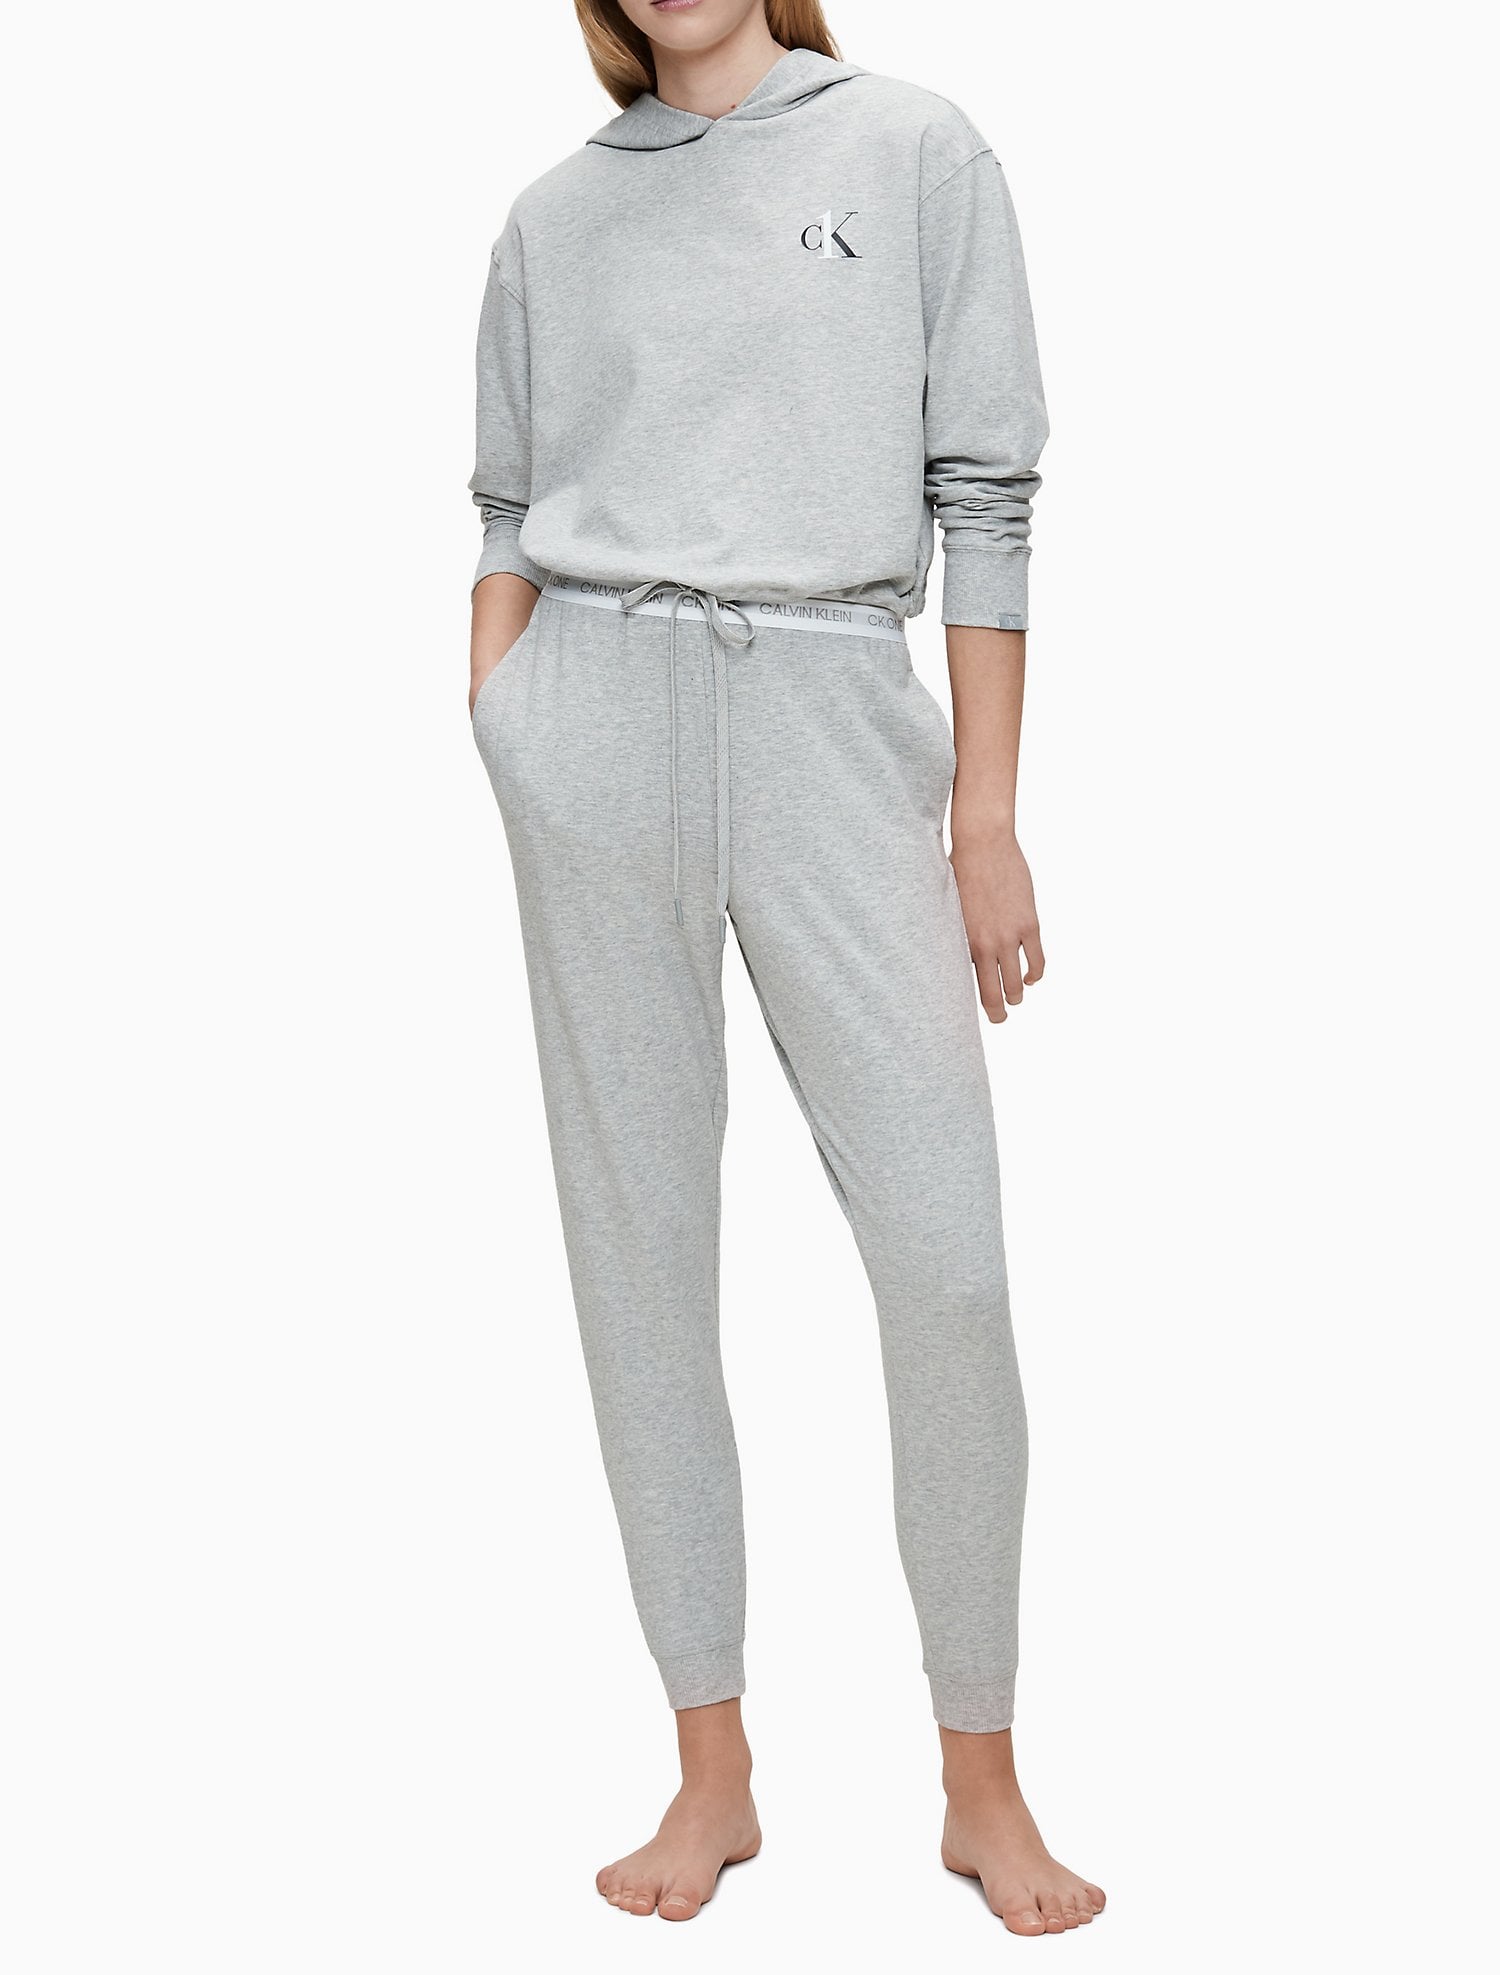 How to Style Gray Sweatpants